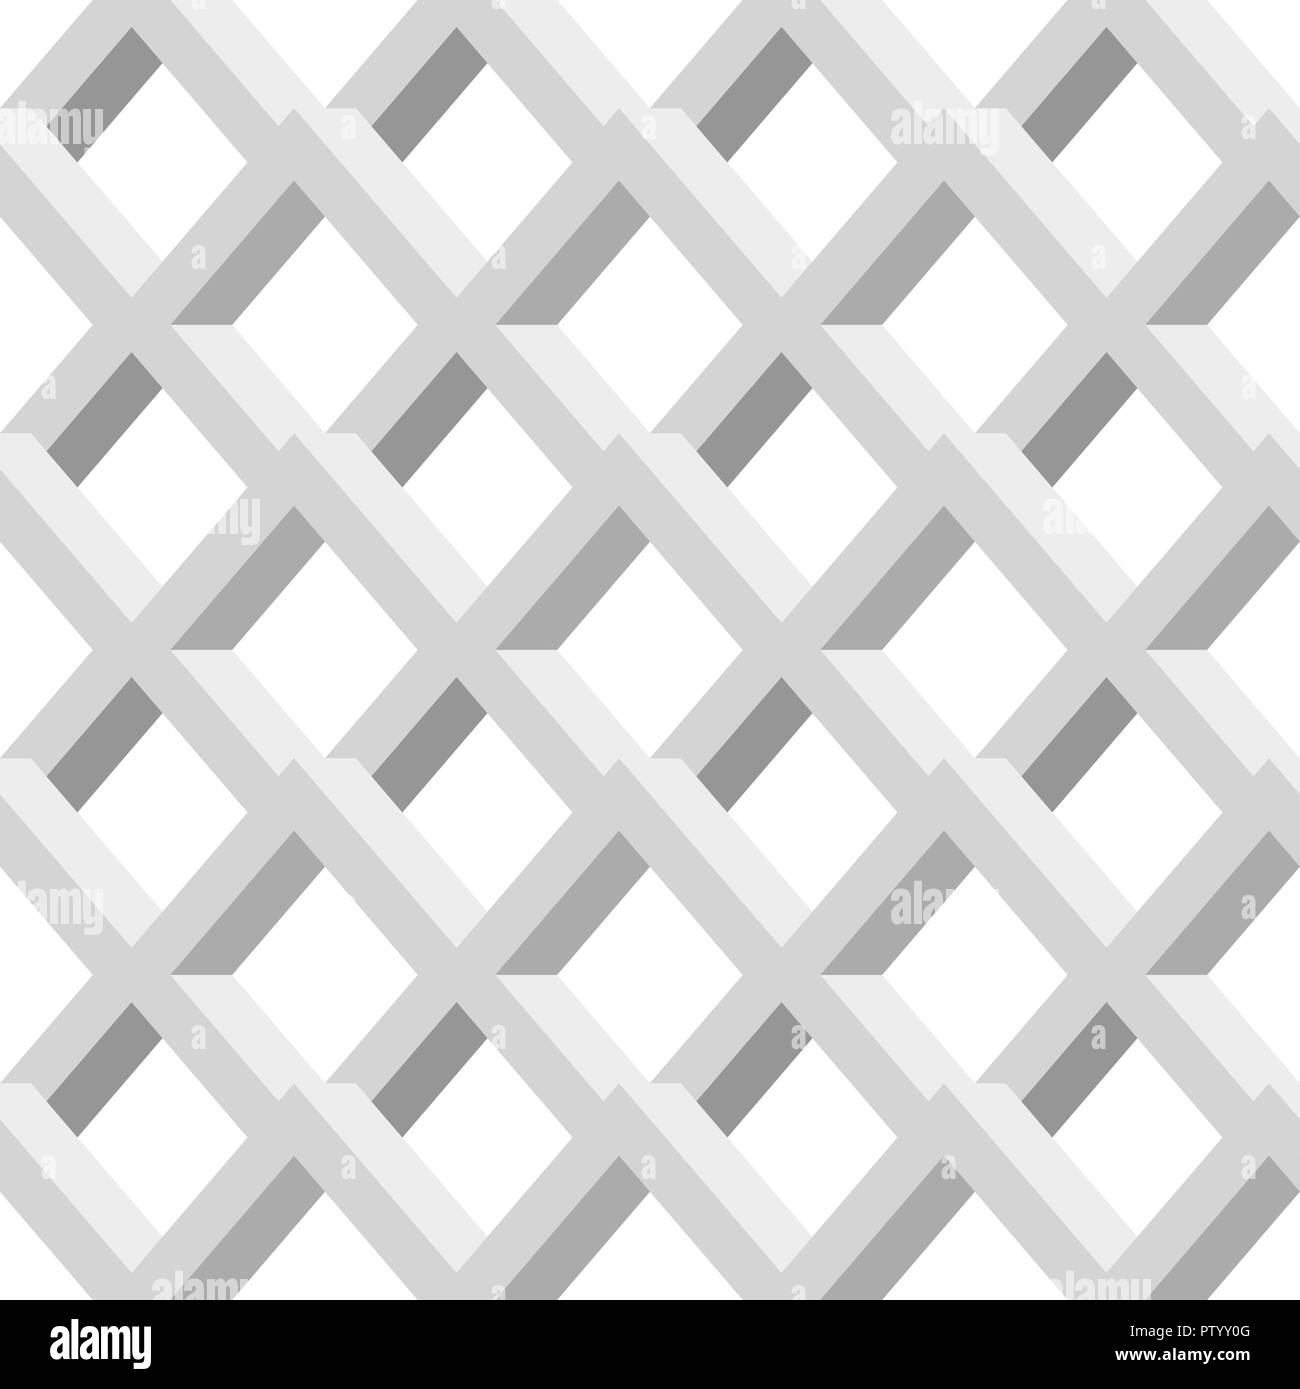 Gray grid. Abstract seamless geometric pattern Stock Vector